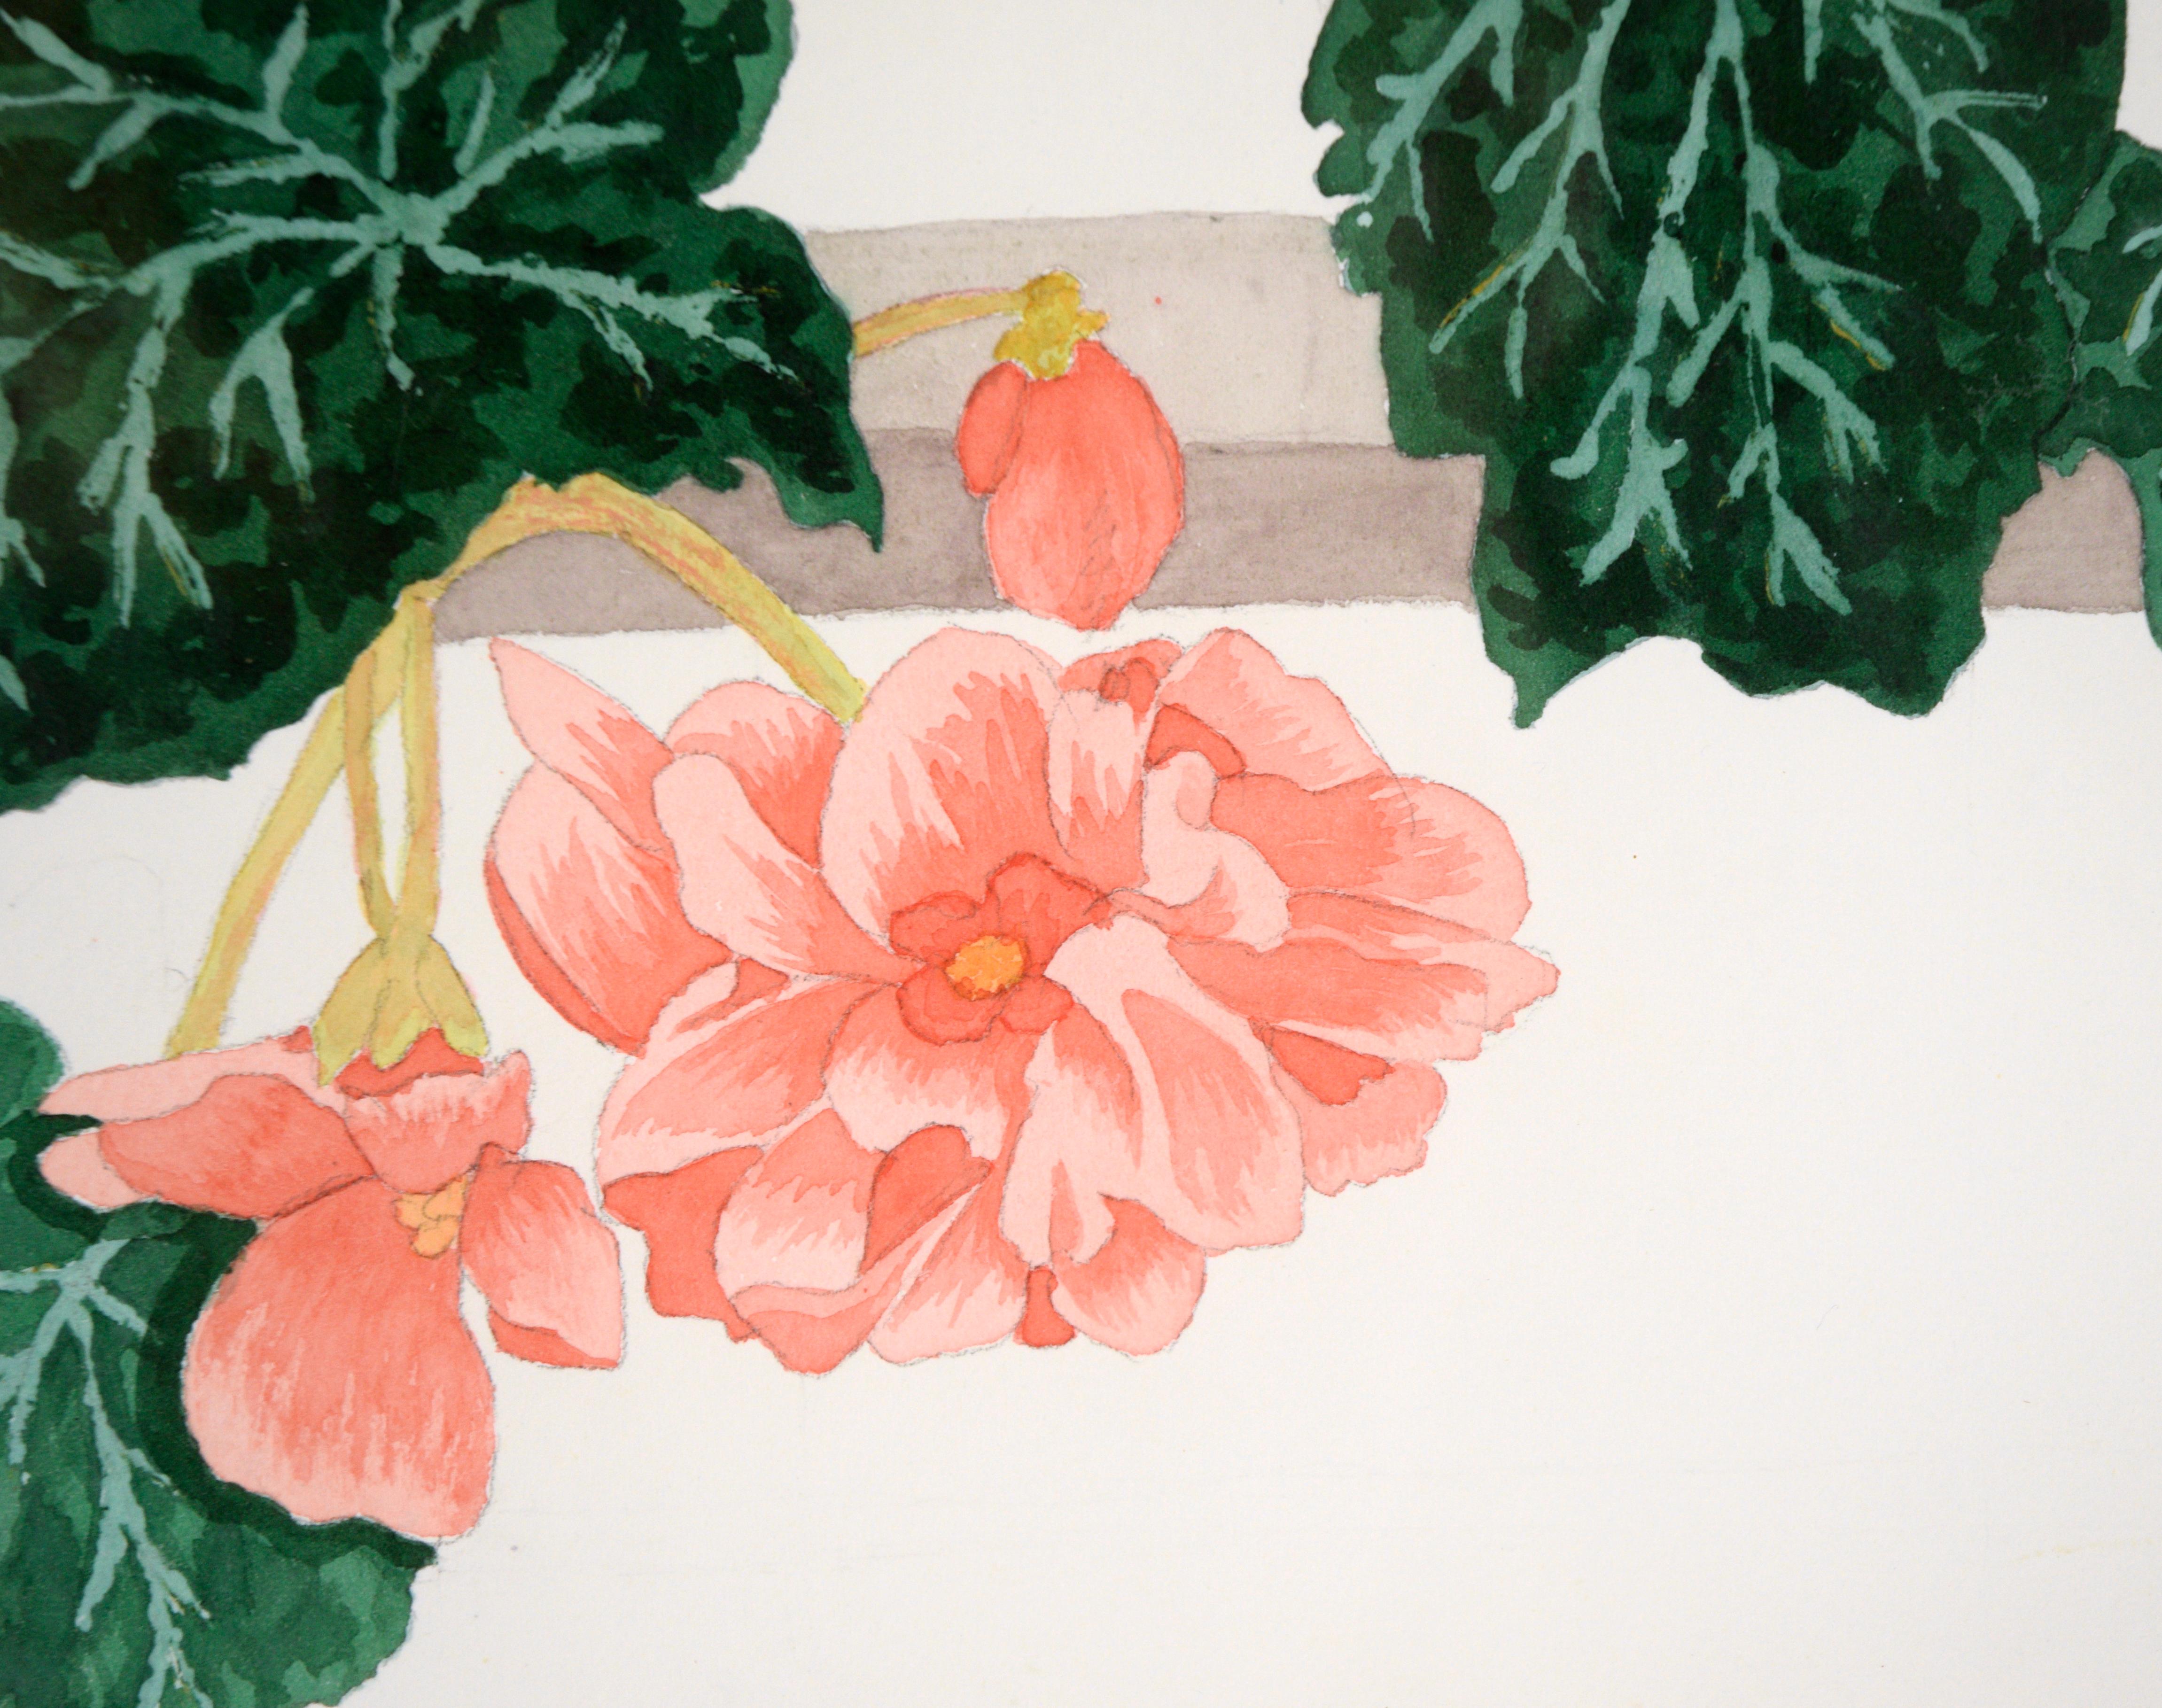 Pink Begonias - Floral Study in Watercolor on Heavy Paper - Beige Still-Life by Barbara Gibson